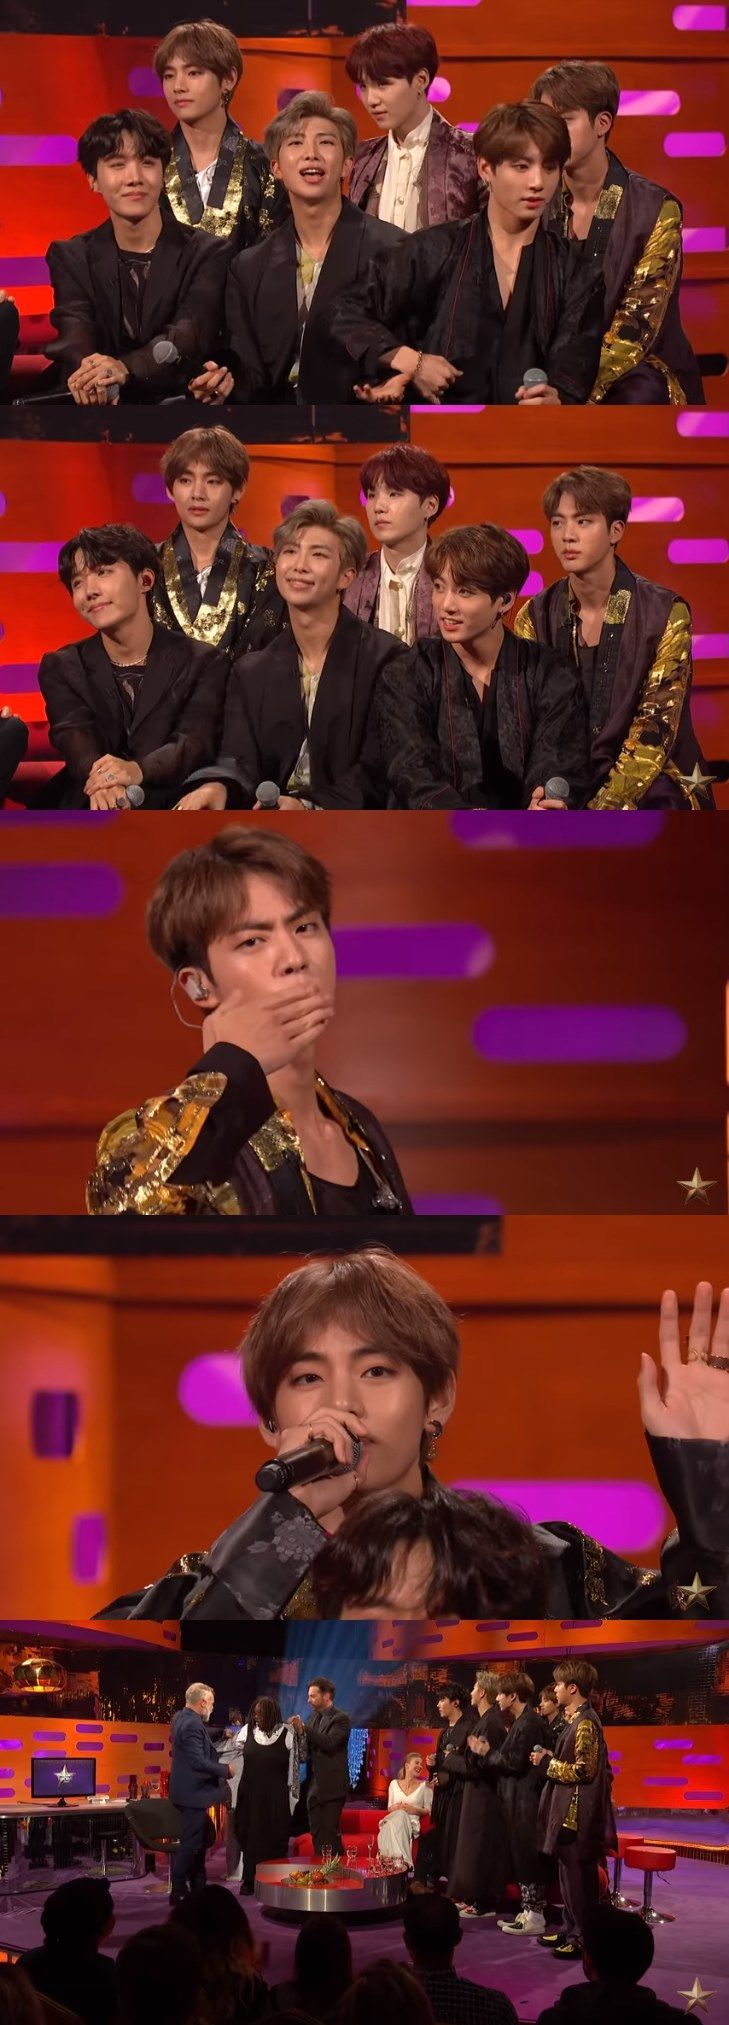 BTS was a guest of the BBCs The Graham Norton Show, which aired at 10:35 pm on the 12th (local time).The recording was held the day before, but member Jimin was absent due to health problems on his neck and back.On the air, BTS appeared under the introduction of The Most Popular Boy Band in the World. Members in Hanbok-style costumes opened with the Idol stage.Members of the country were also in a difficult situation due to a heel injury, but the members performed well.Leader RM left the impression a really great day: taking selfies with guests and another cast member also joked about Jimins vacancy: Do you need any other members?The members conveyed a personal greeting and Jin also threw a hand kiss toward the camera.In particular, host Norton asked, BTS is the cover model of the US Current Weekly Time: Has anyone tried the cover model here?In relation to the speech to the United Nations General Assembly, RM replied, I threw a message to love myself because I can not avoid the shadow of life.Wufi Goldberg, who claimed to be a BTS fan, showed interest in costumes by wearing hanbok himself.The Graham Norton Show is a BBC late-night popular talk show that started broadcasting in 2007.Countless stars have appeared, including Madonna, Tom Hanks, Ewan McGregor, Coldplay, Hugh Grant, Cameron Diaz, Tom Cruise, Katy Perry, Lady Gaga and David Beckham.